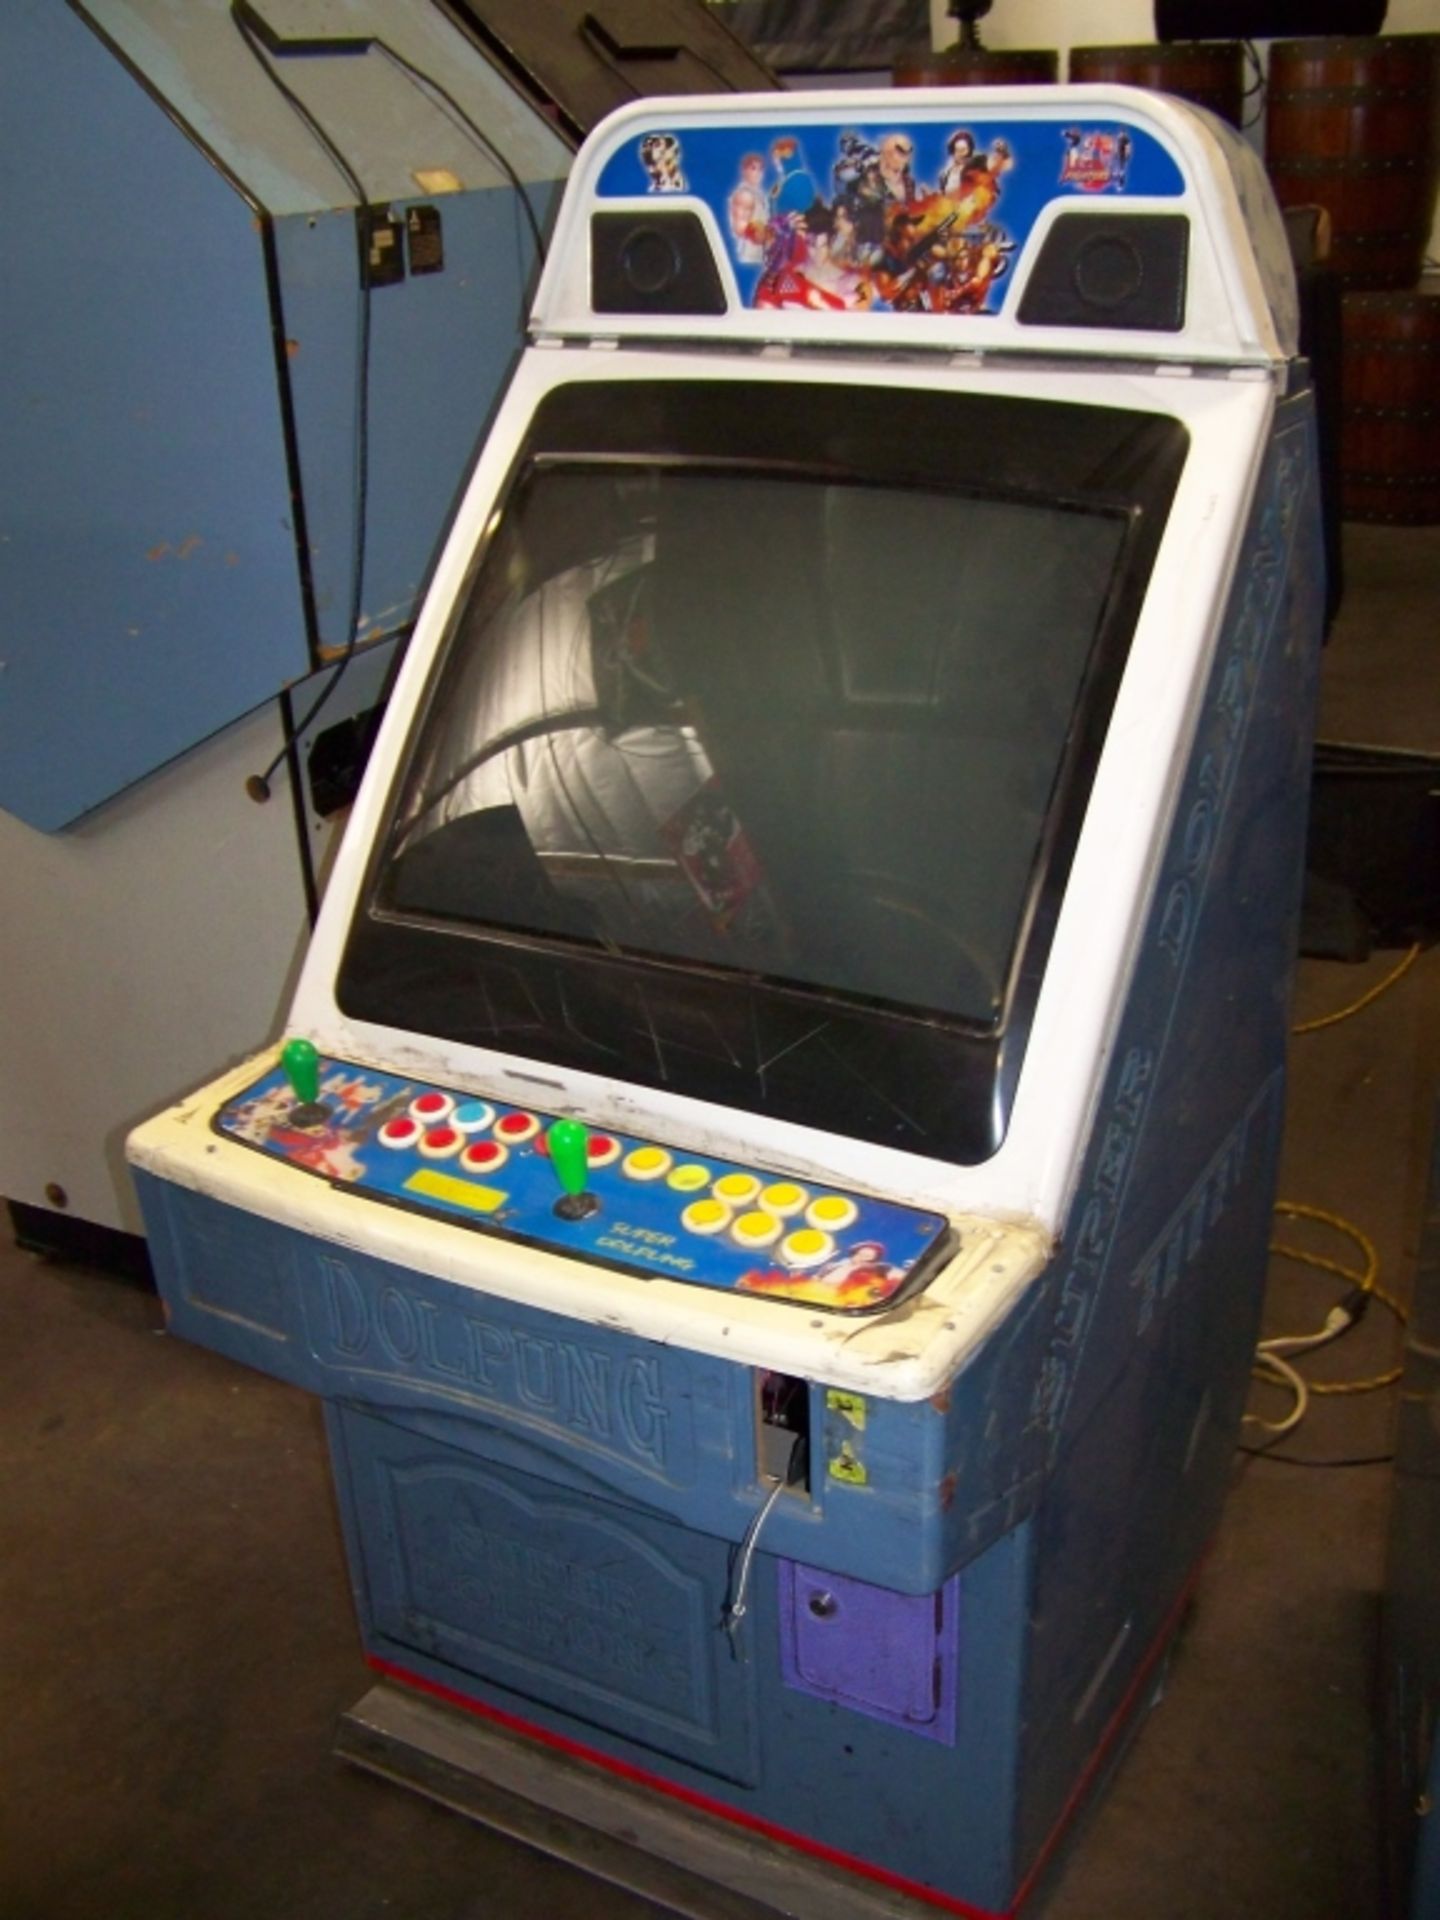 CANDY CABINET STREET FIGHTER 3 JAMMA ARCADE Item is in used condition. Evidence of wear and - Image 3 of 3